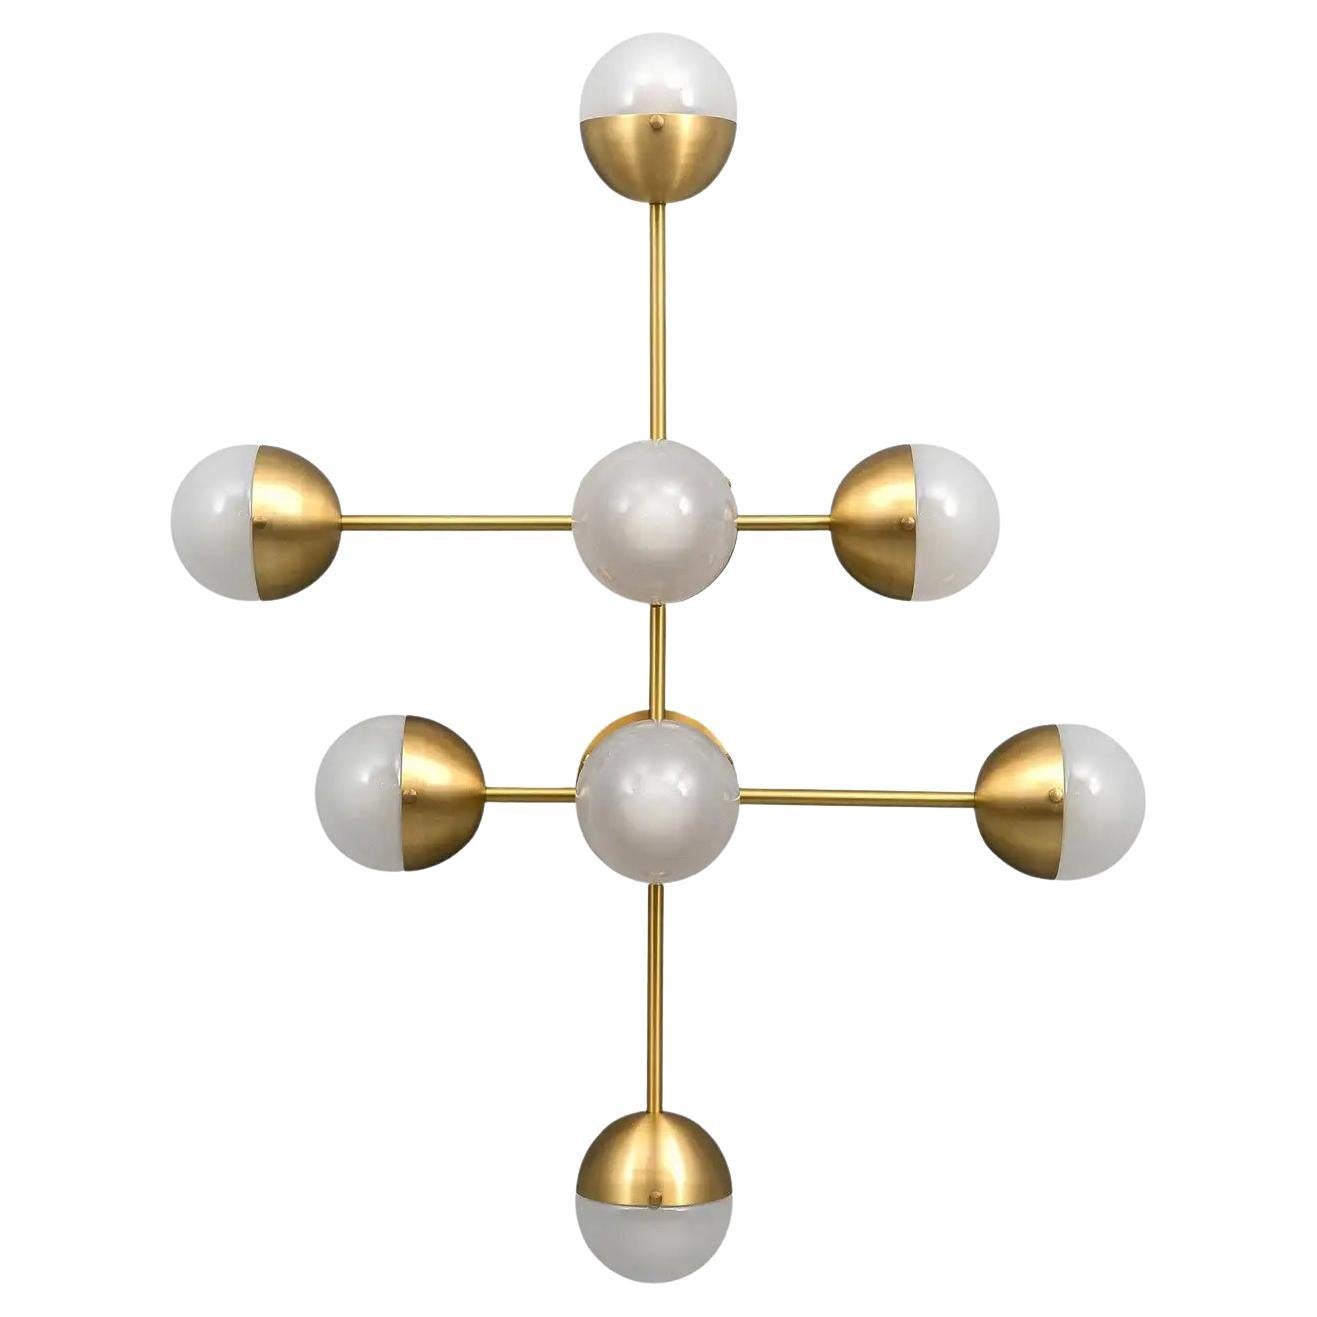 Molecule 8 Wall Sconce by Schwung For Sale